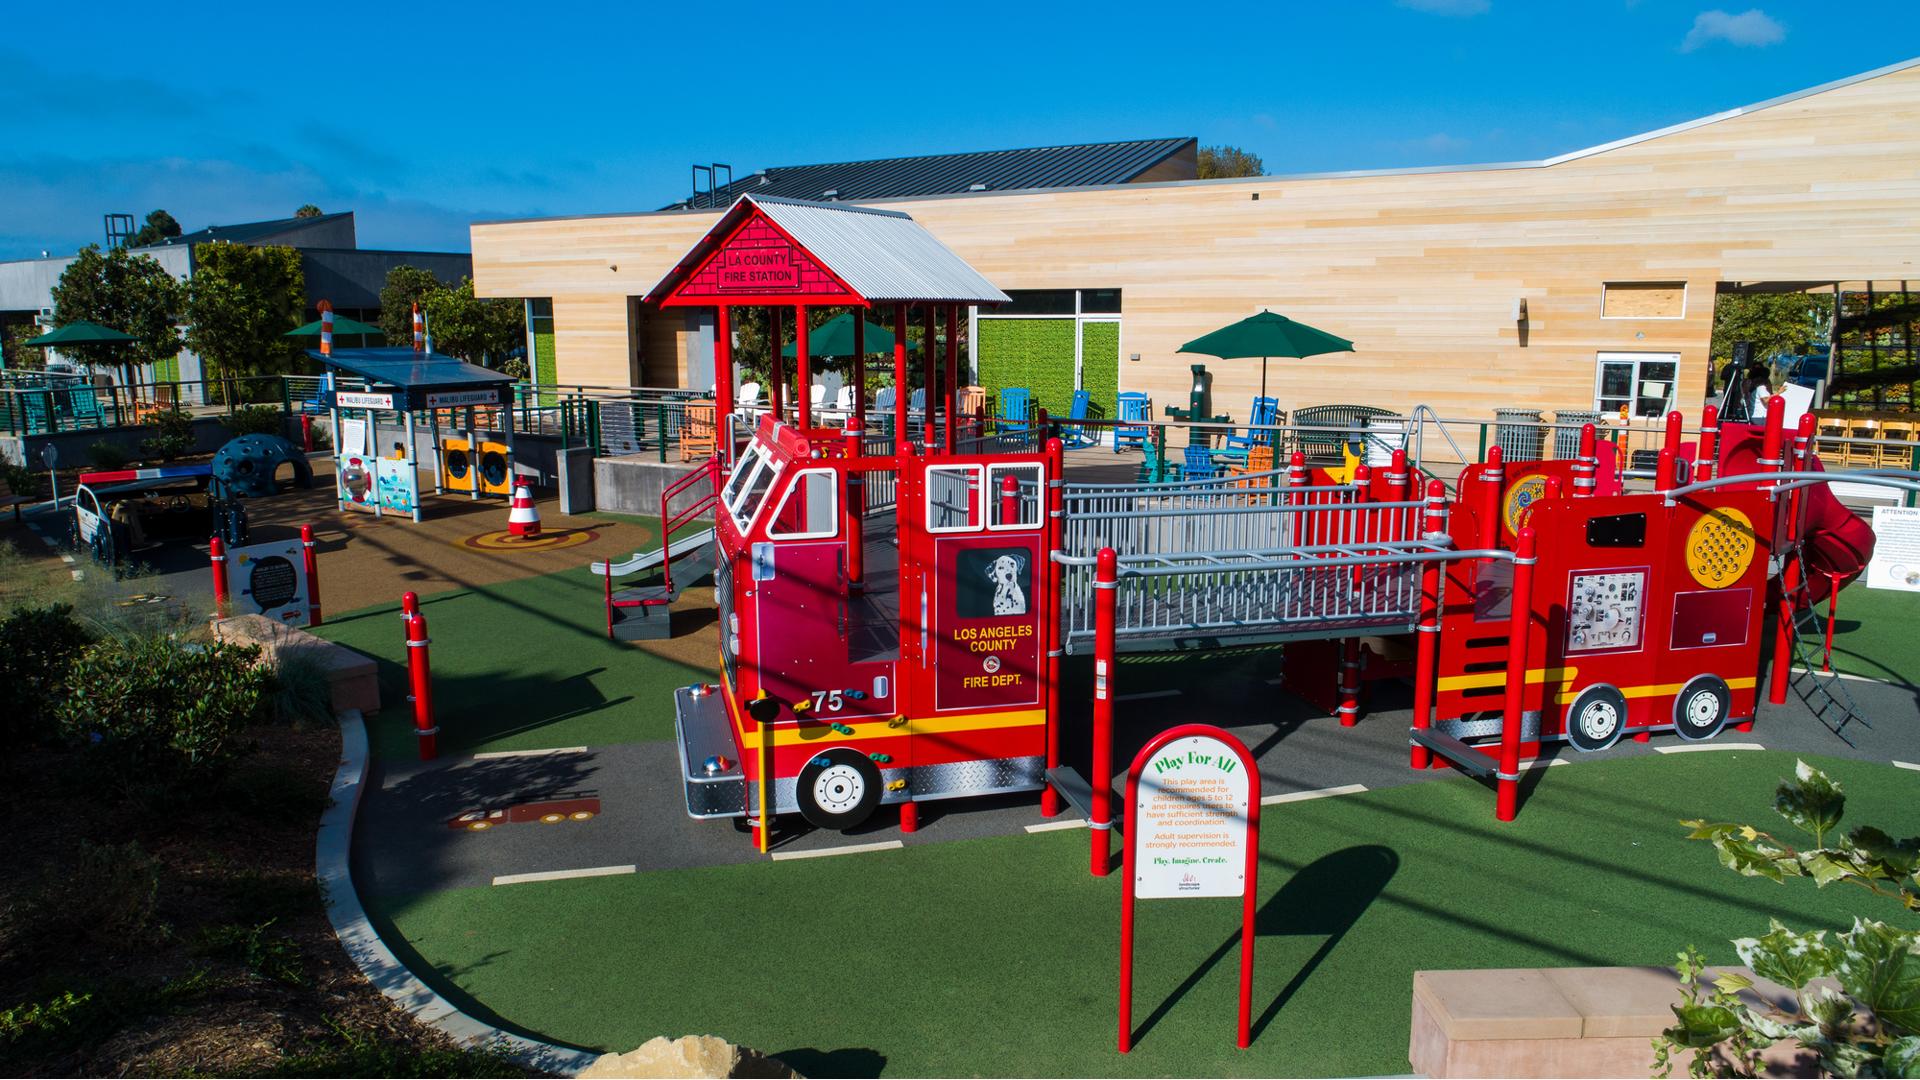 Full elevated view of an inclusive play area with a large play structure designed like a fire engine driving down a road.